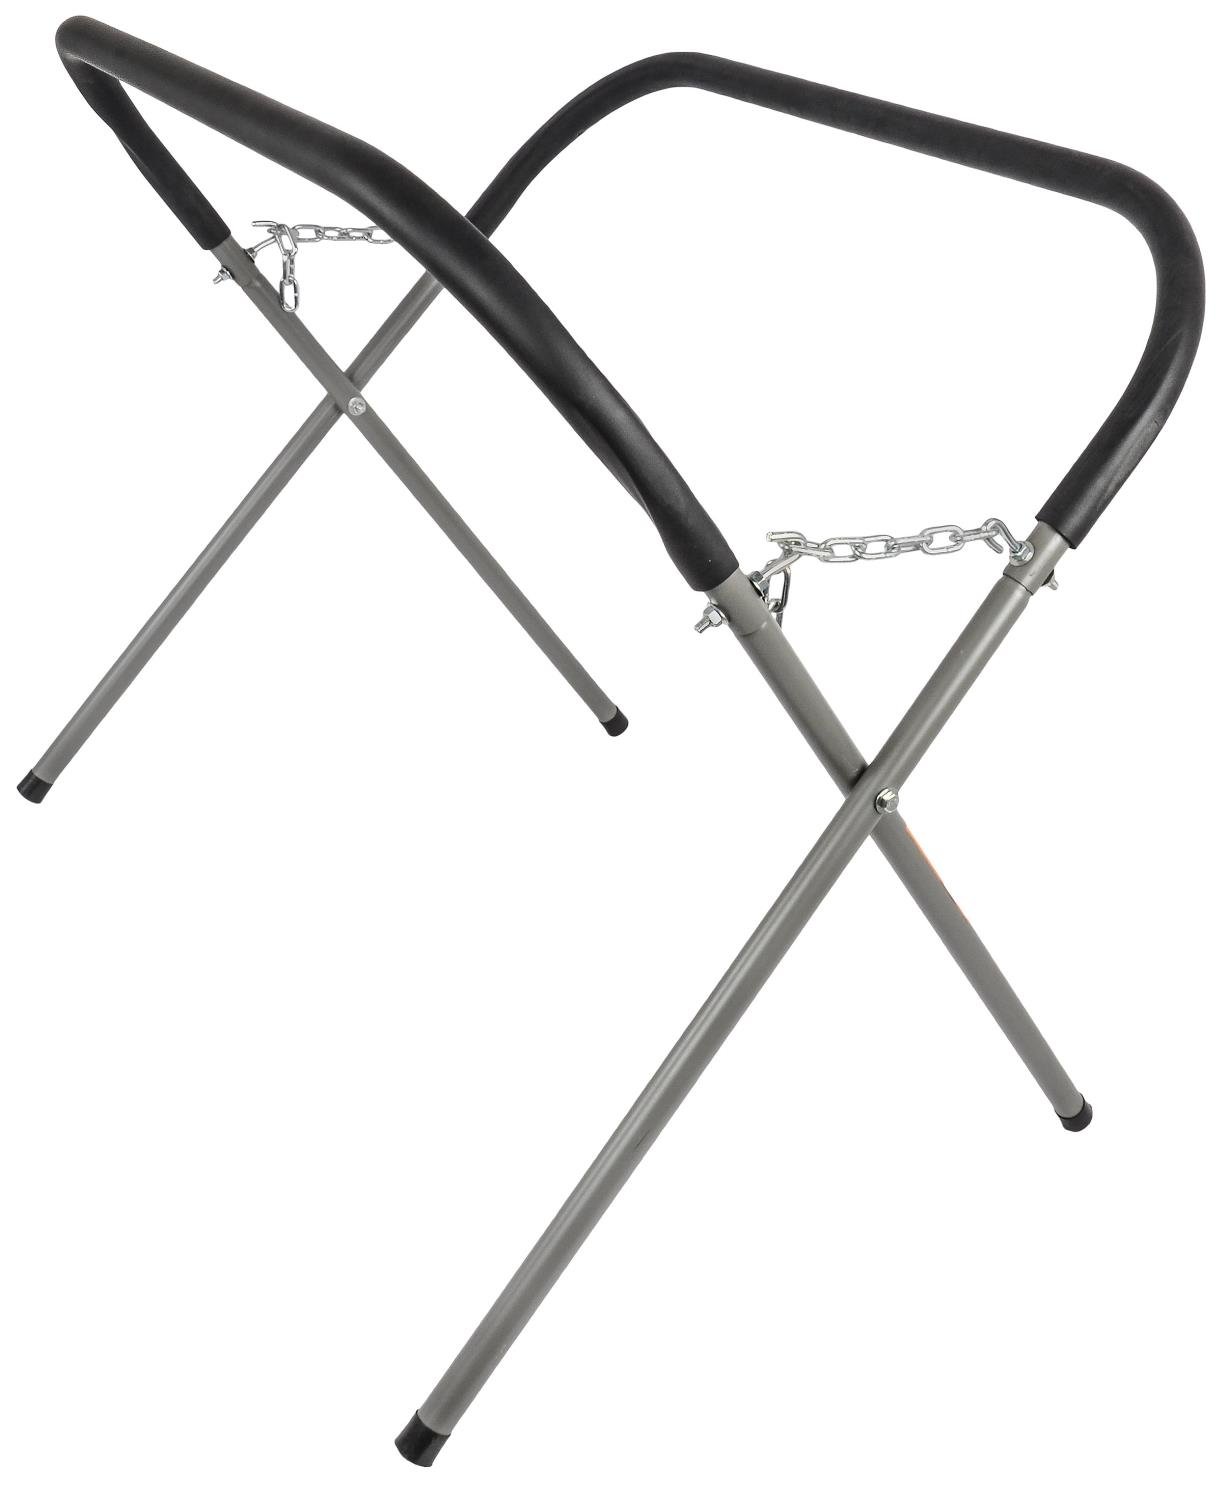 folding work stands padded Auto Body Repair Stand painting tools 500 LB cap. 